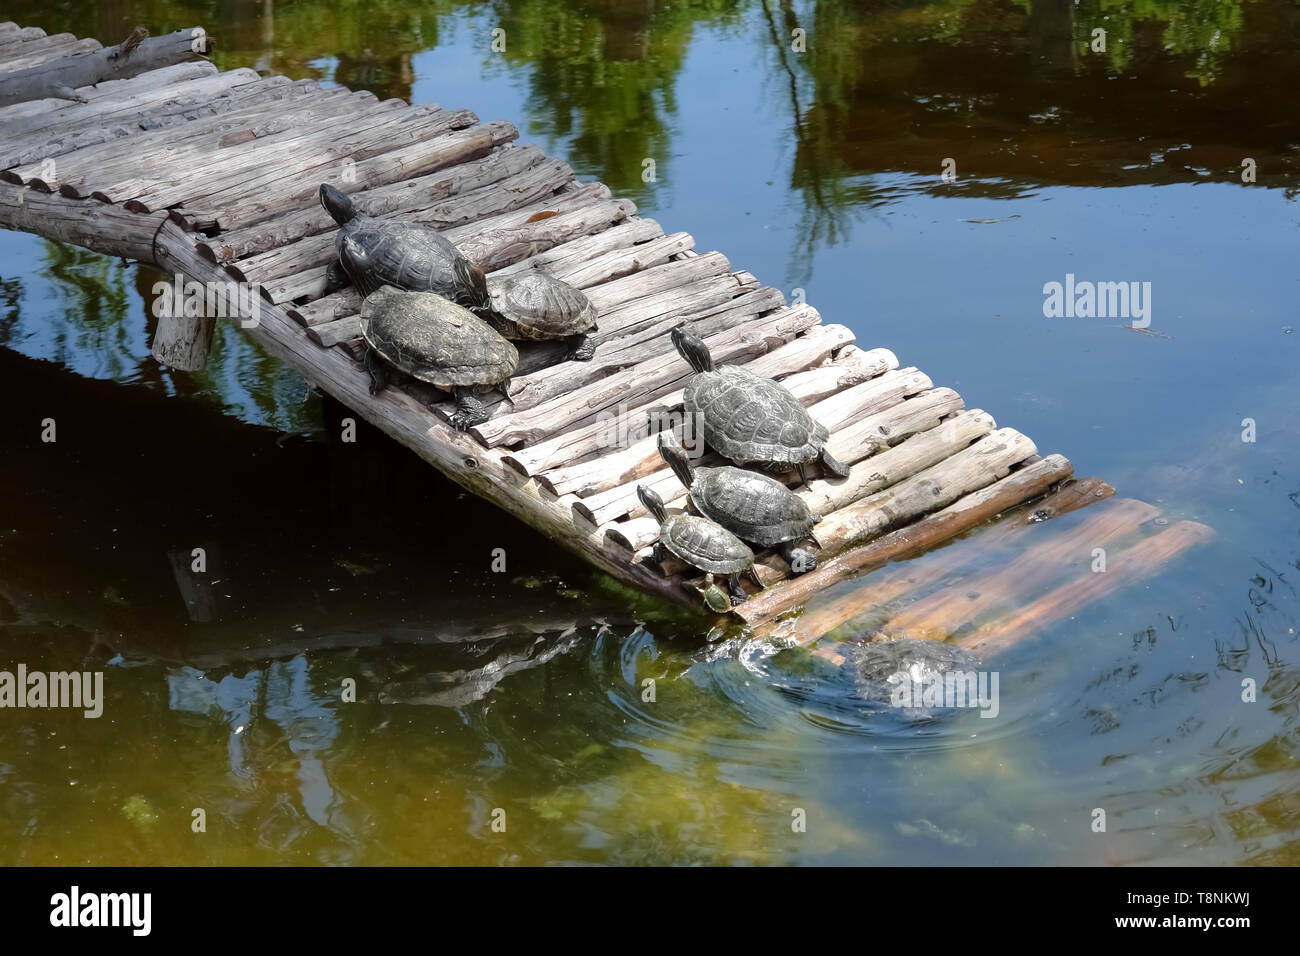 A family of turtles on a wooden bridge in a lake at a zoo in Turkey. Stock Photo